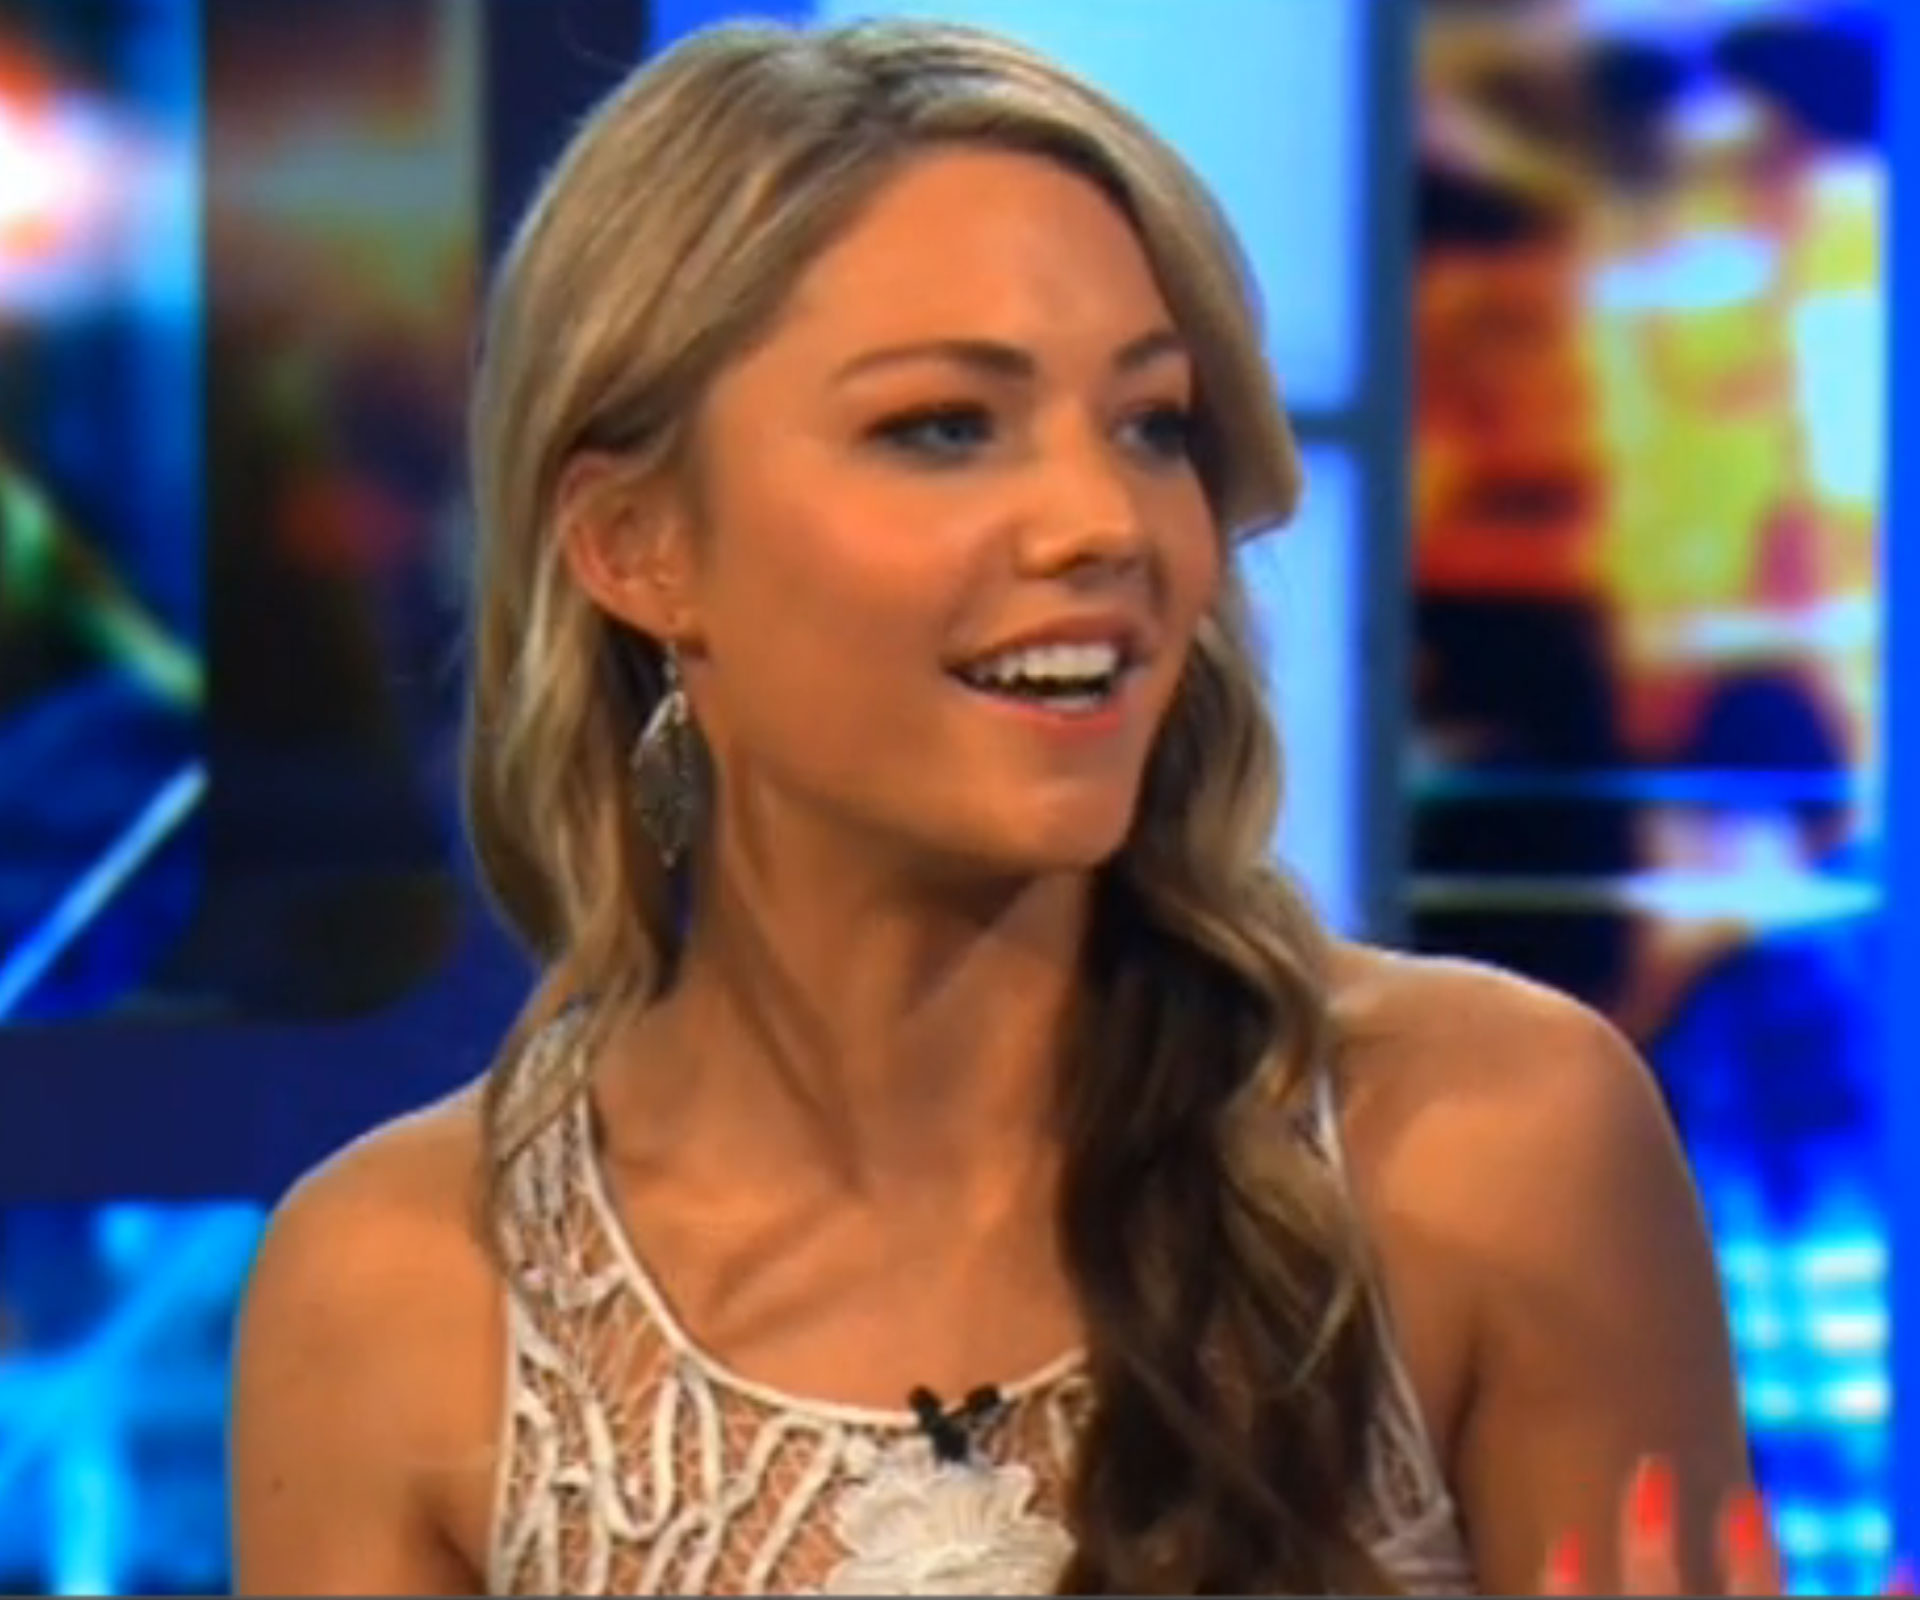 Australia’s brand new Bachelorette Sam Frost on what she’ll be looking for in a man